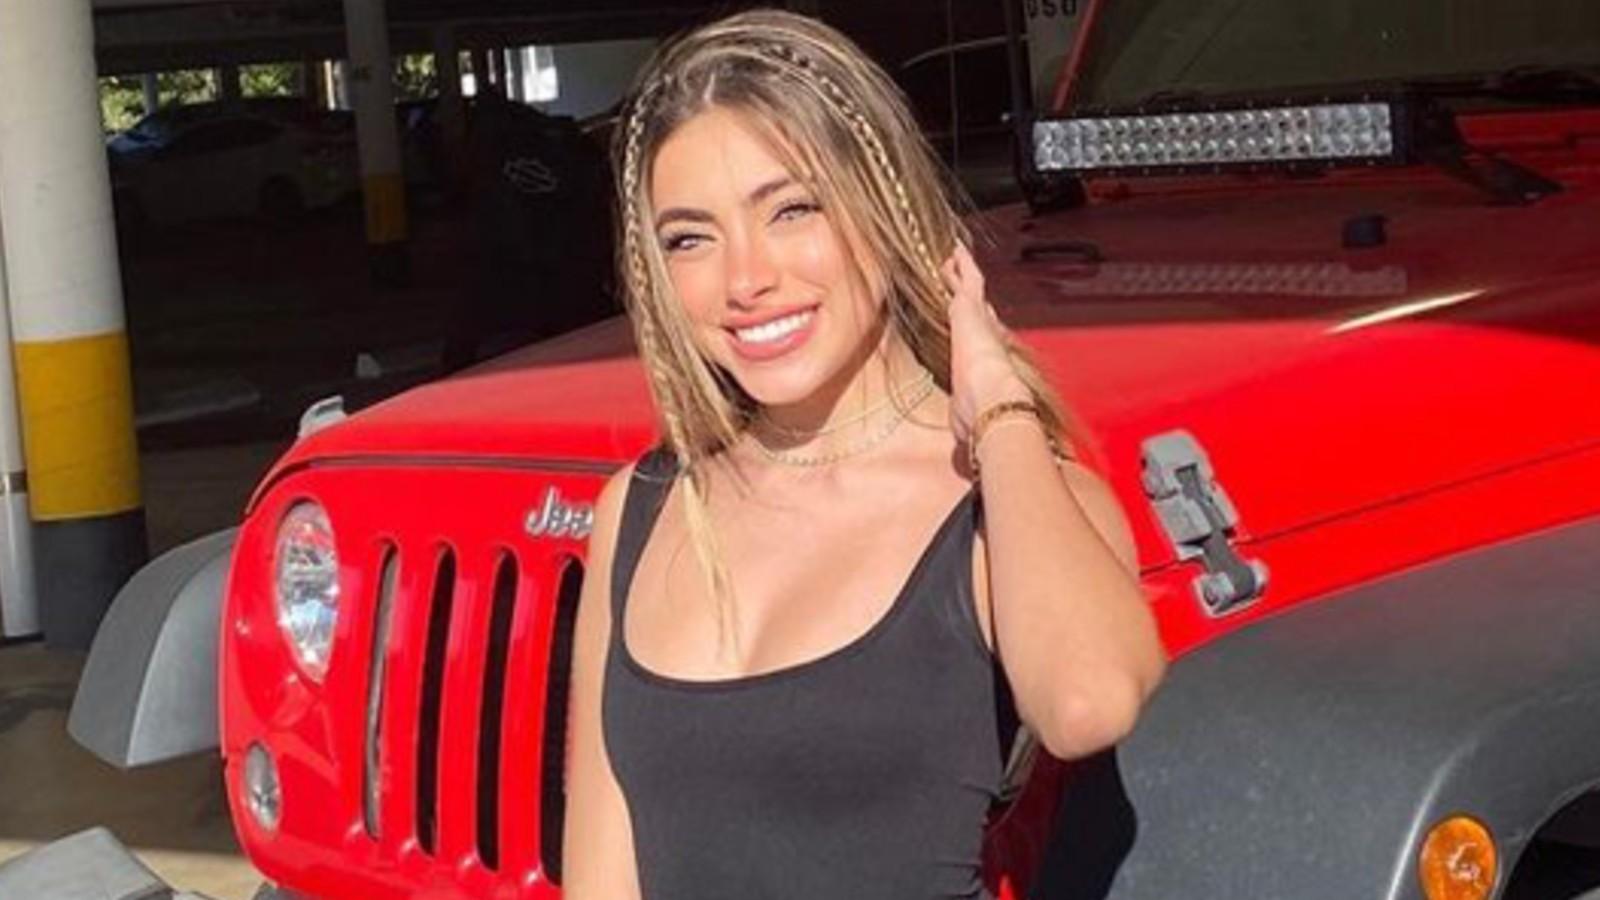 Valeria Arguelles poses in front of a car